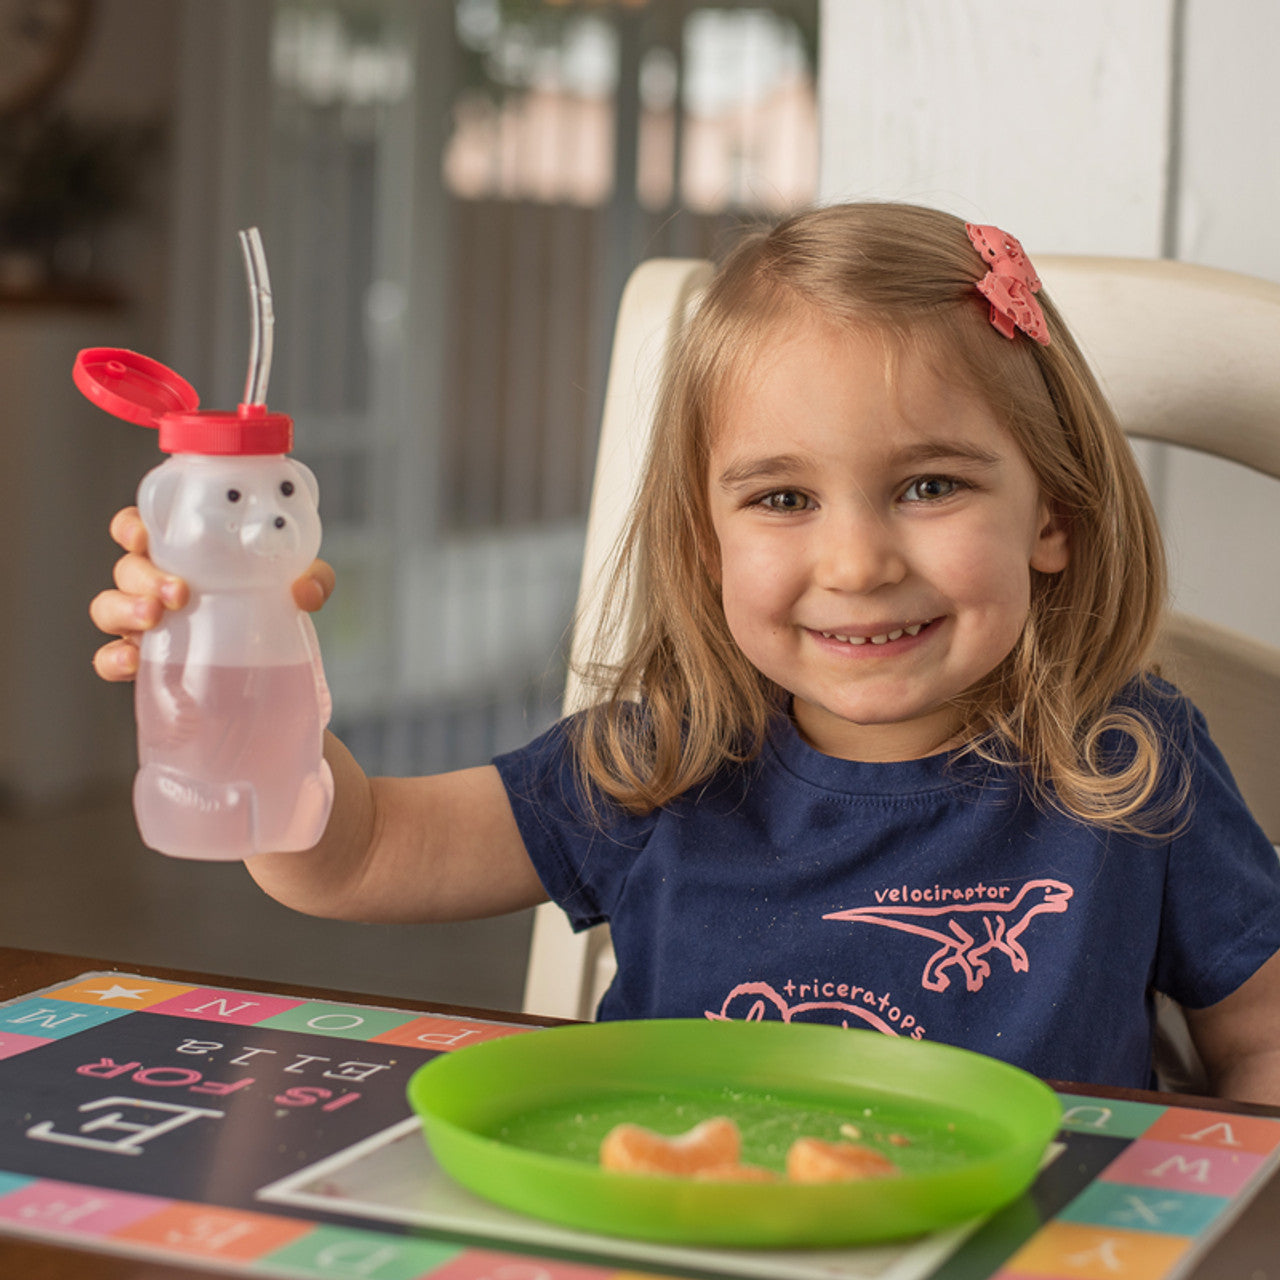 Juice Bear Bottle Drinking Cup with Long Straws (8 Ounces)